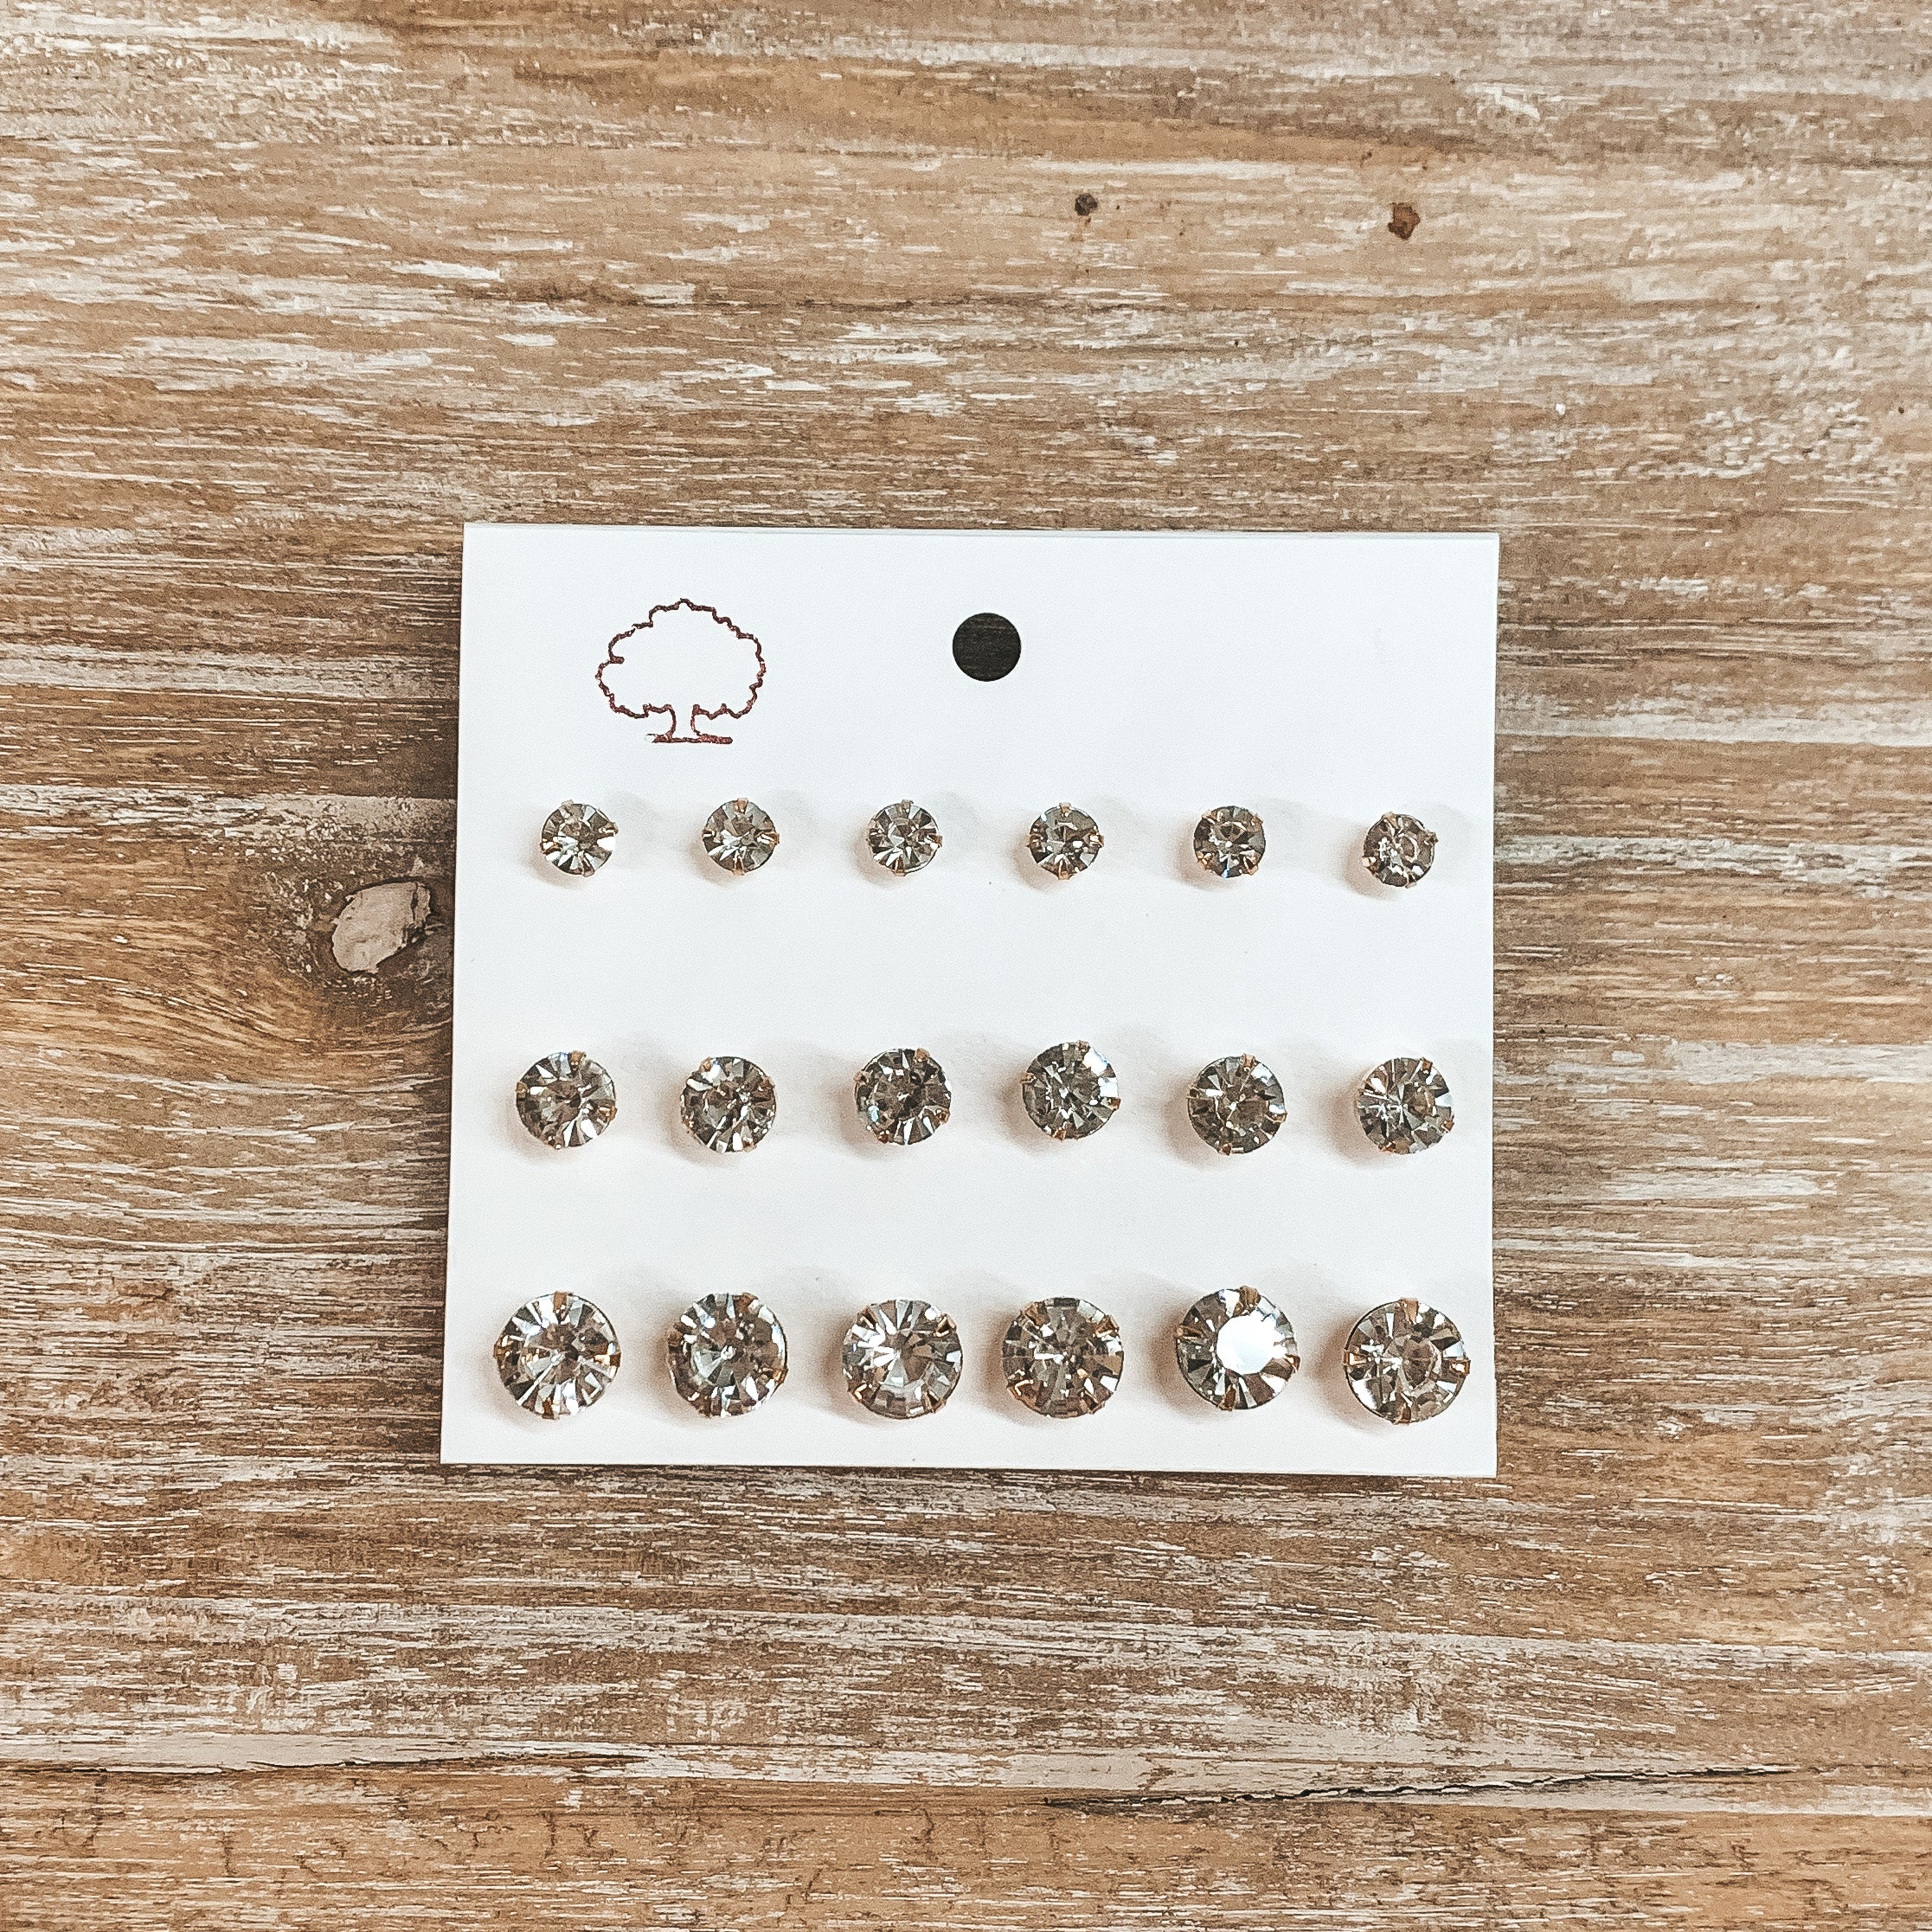 This is a pack of nine crystal clear studs in a gold settings in different sizes. These earrings are placed on a white earring holder and taken on a wooden slate.